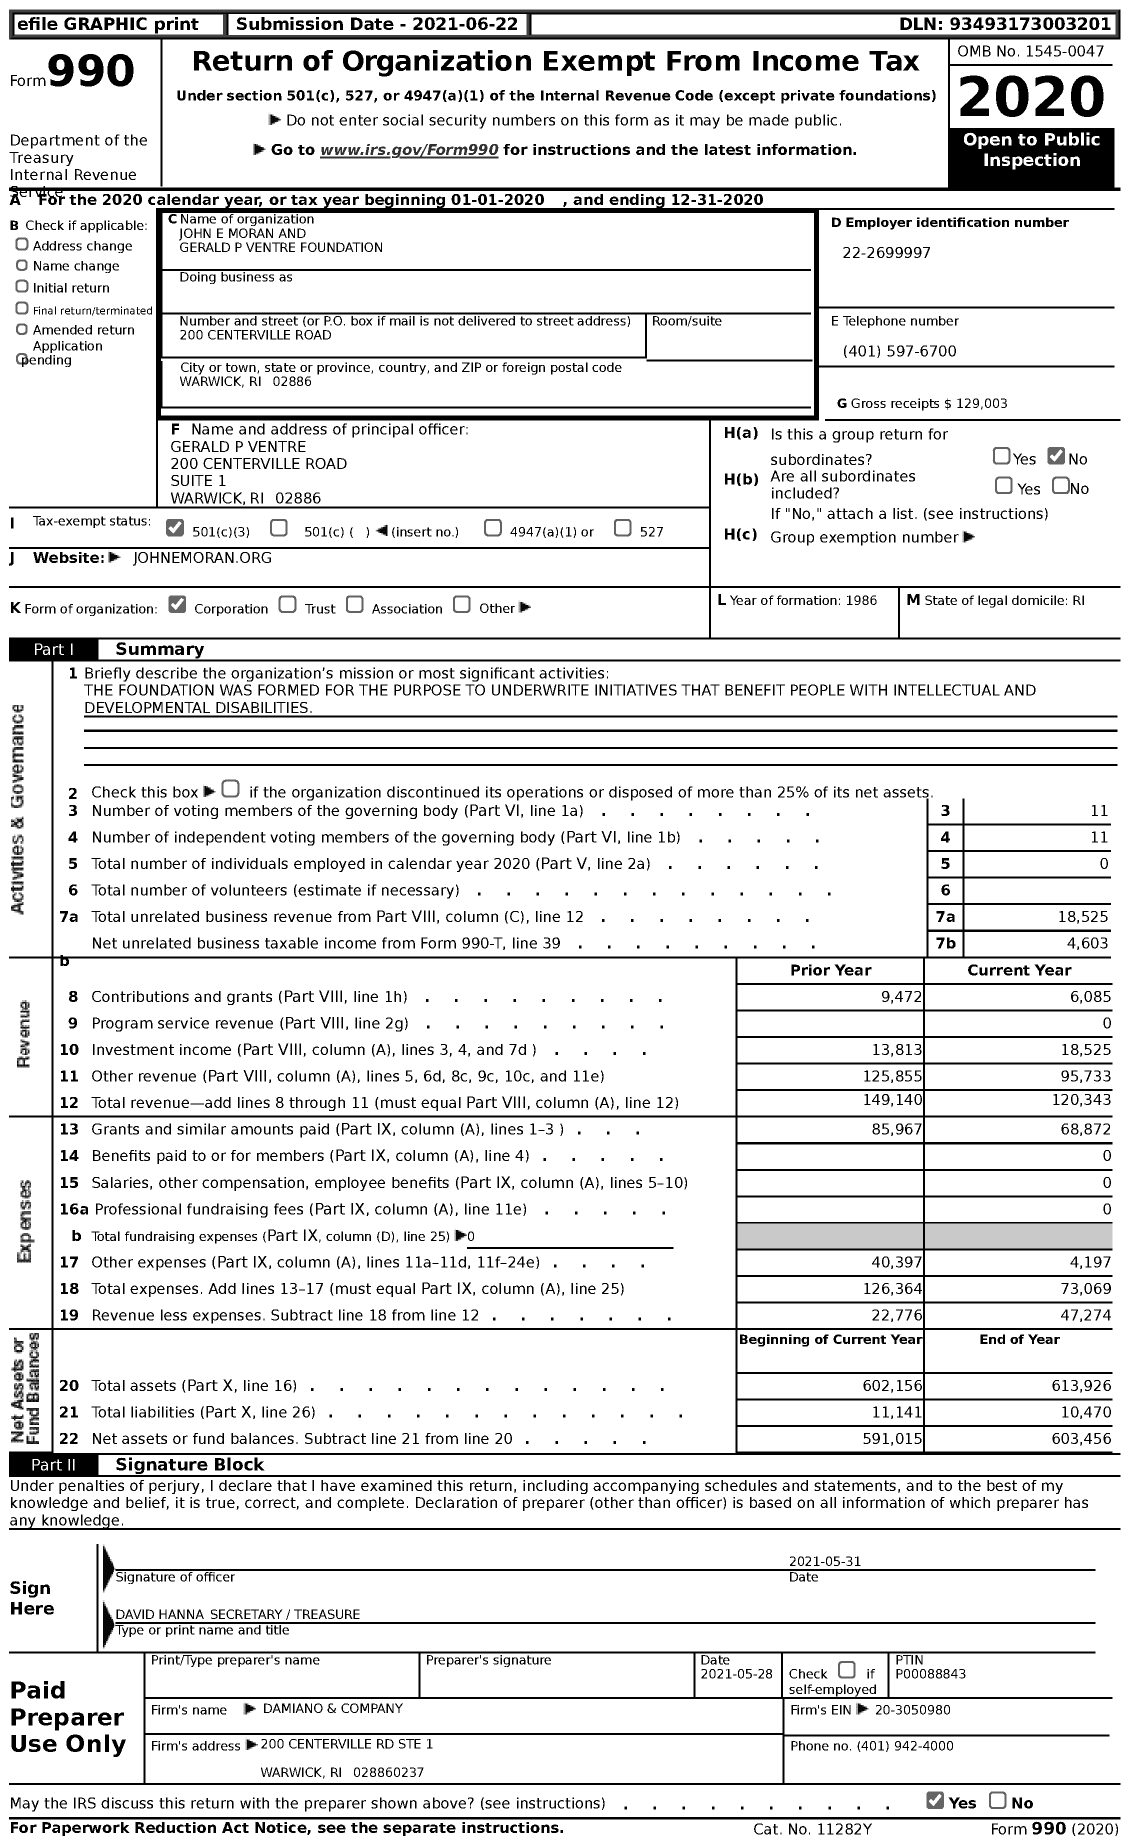 Image of first page of 2020 Form 990 for John E Moran and Gerald P Ventre Foundation